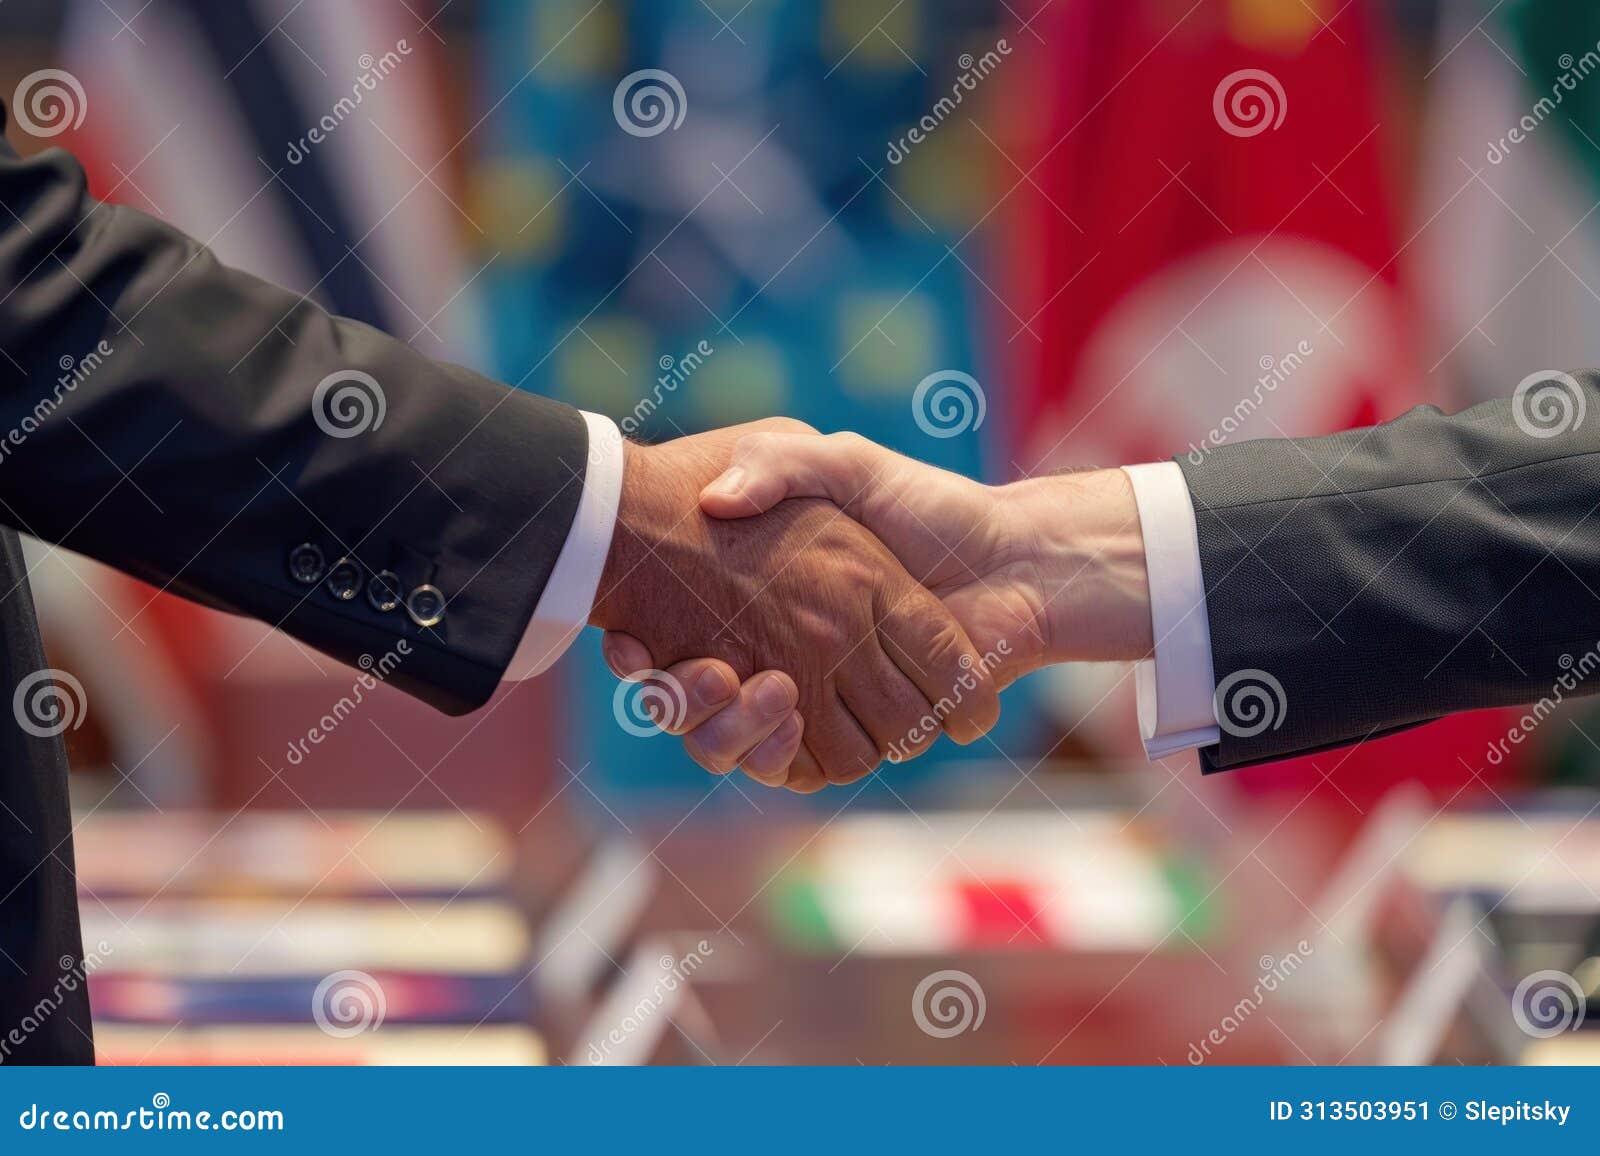 two people in suits shaking hands with g7 nation flags in the background